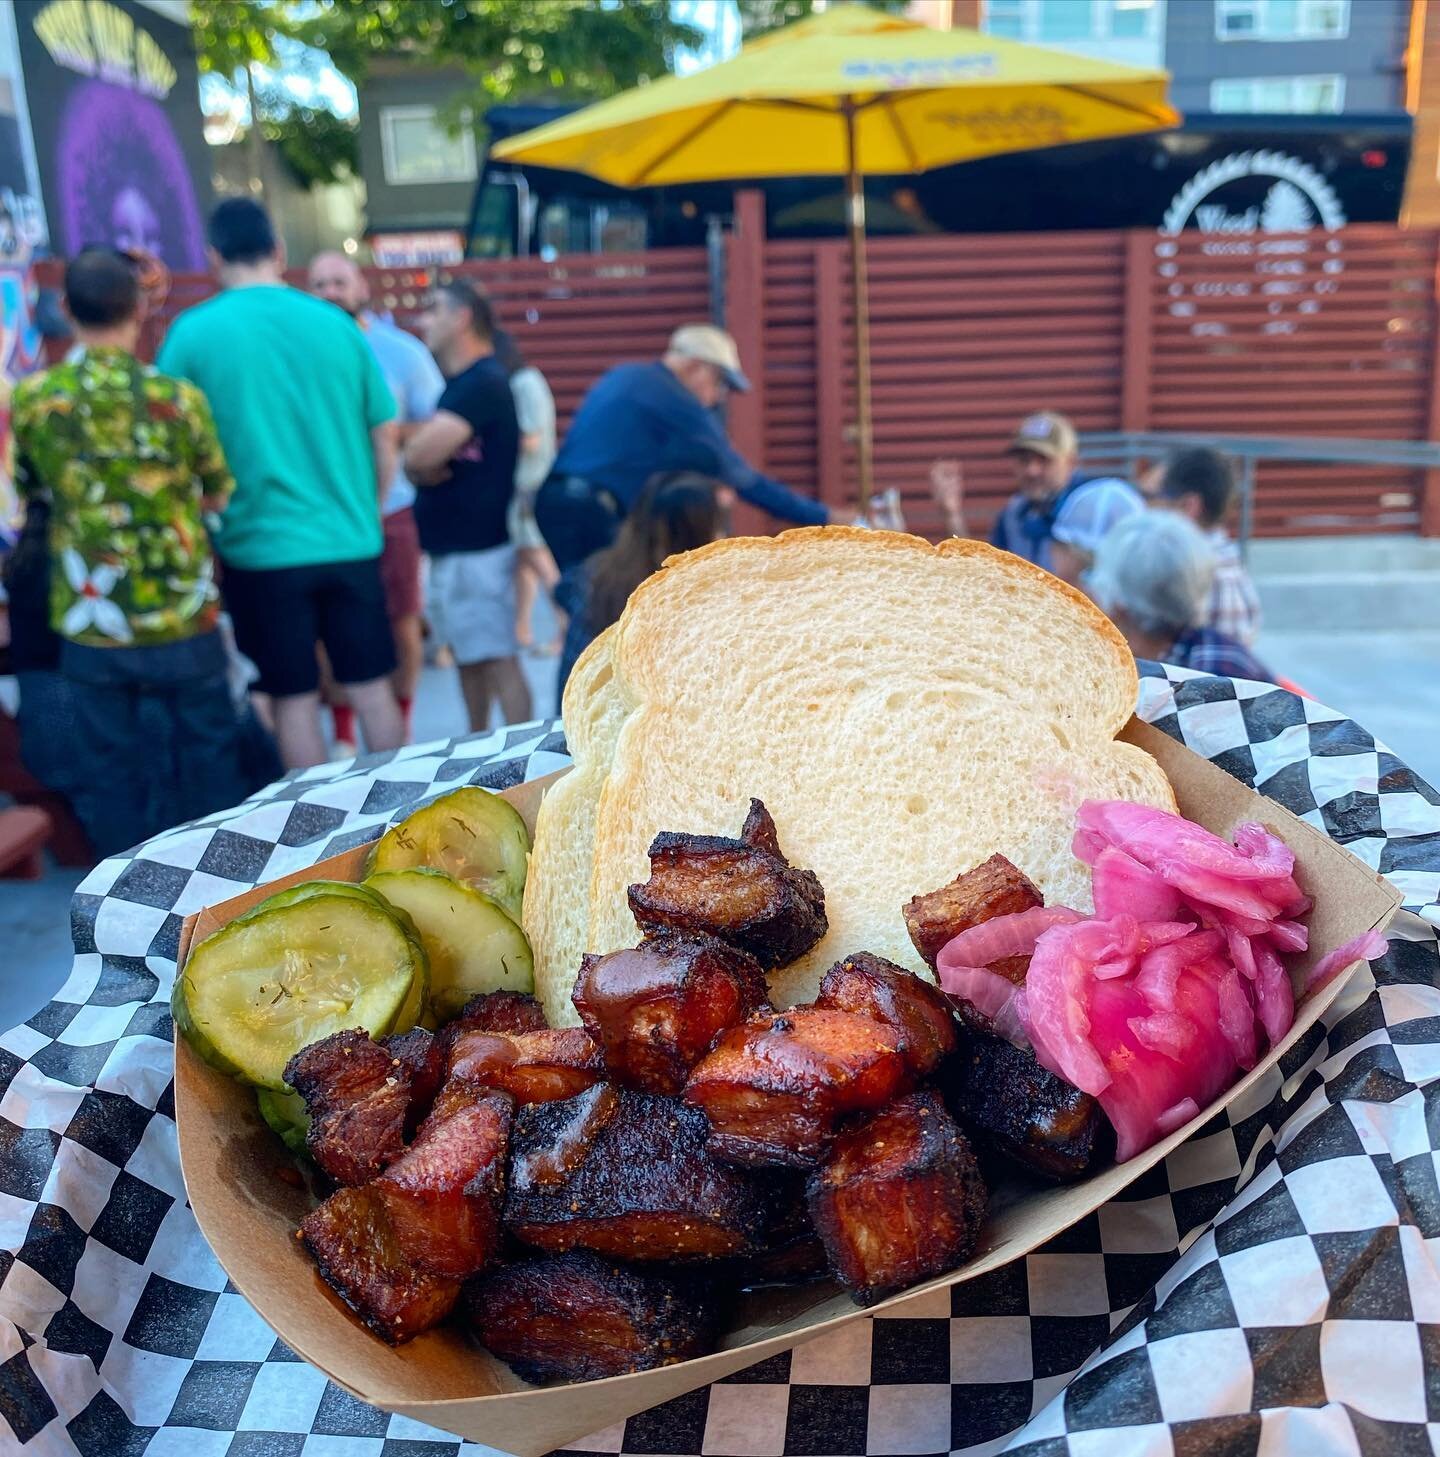 Burnt ends are back! Come join us on the patio. #seattleeats